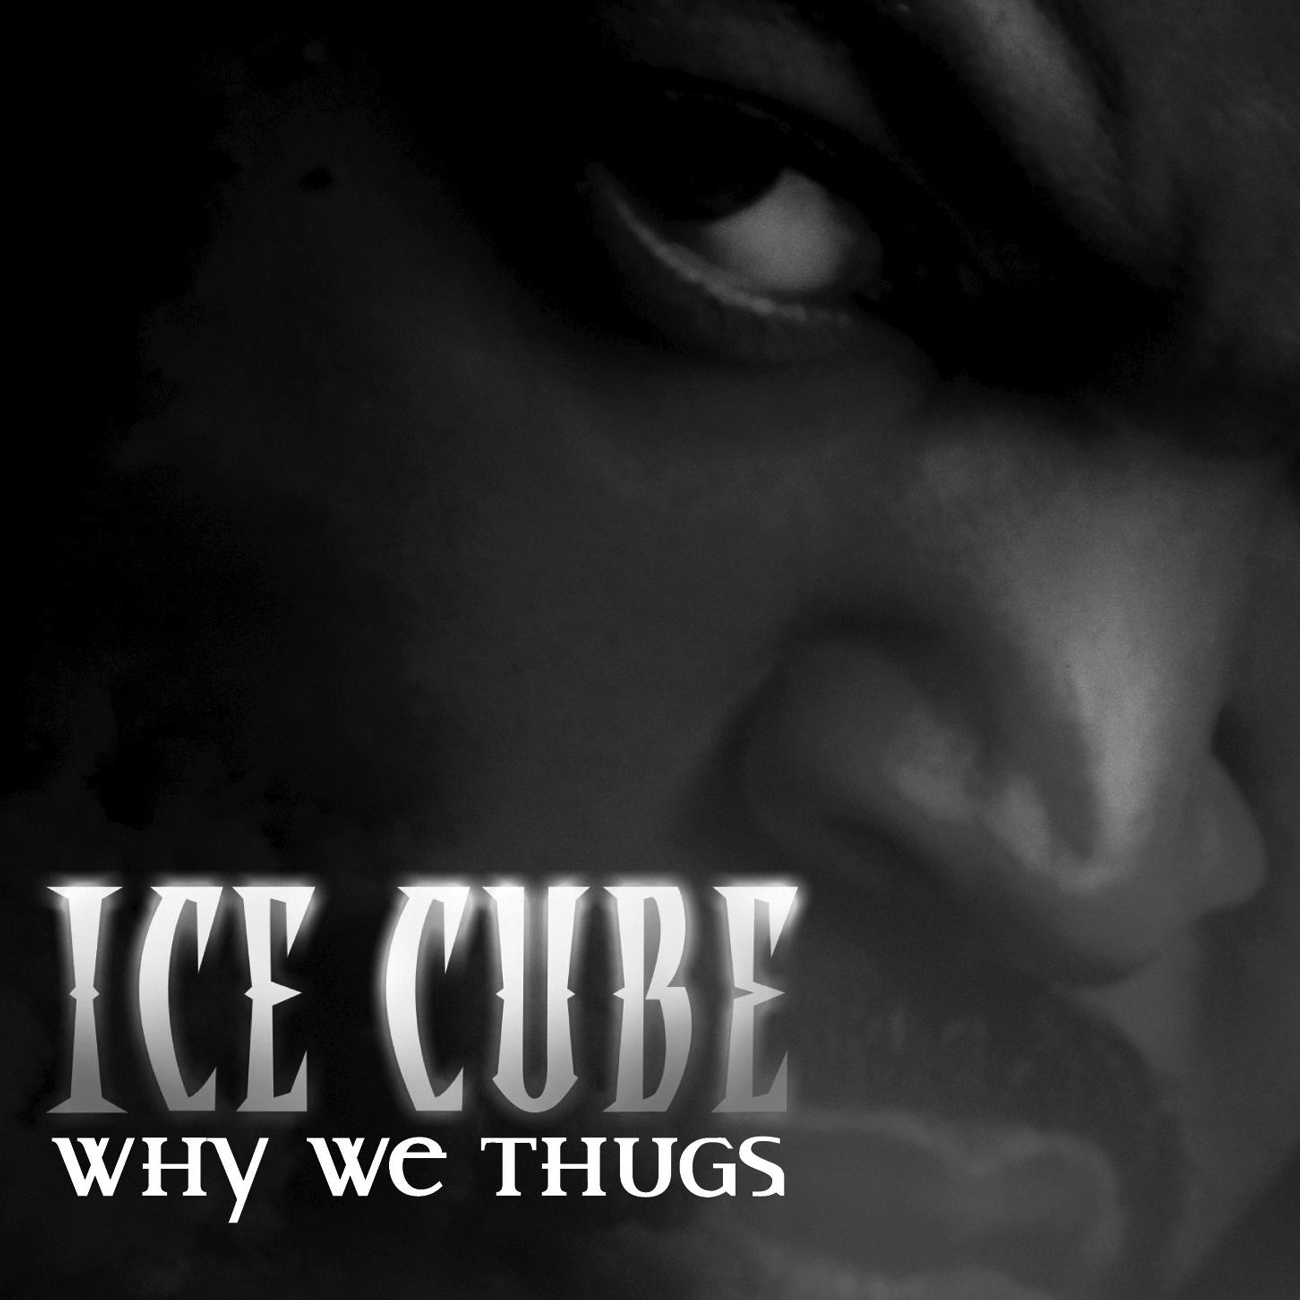 Why We Thugs (edited version)